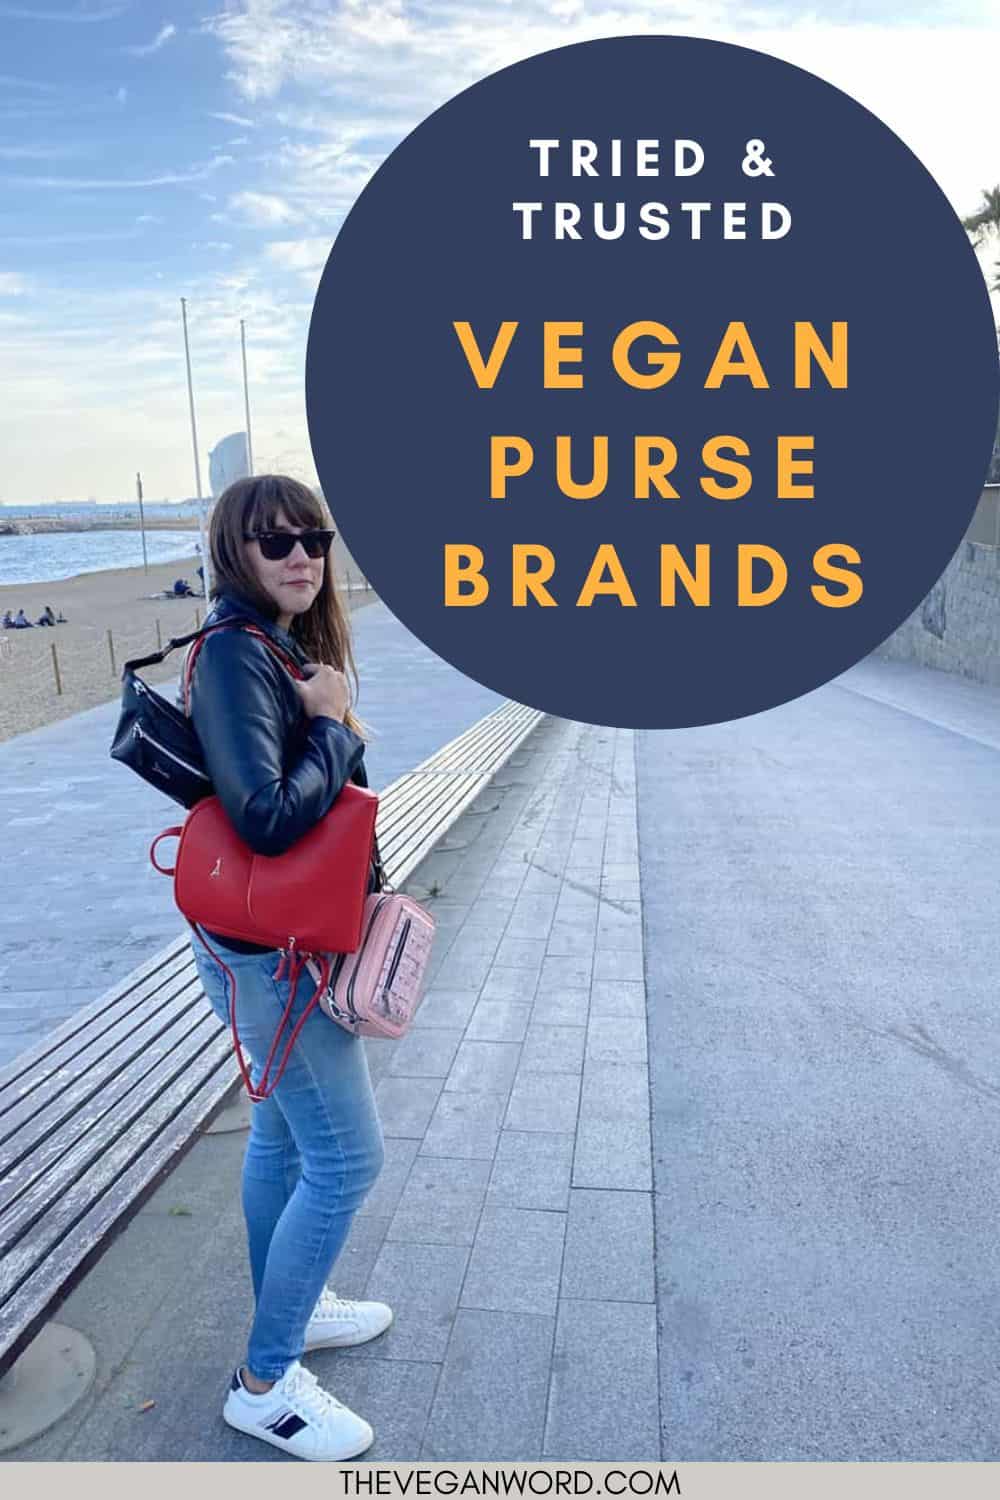 Pinterest image showing the author on the beach holding three handbags with text that reads "tried & trusted vegan purse brands"